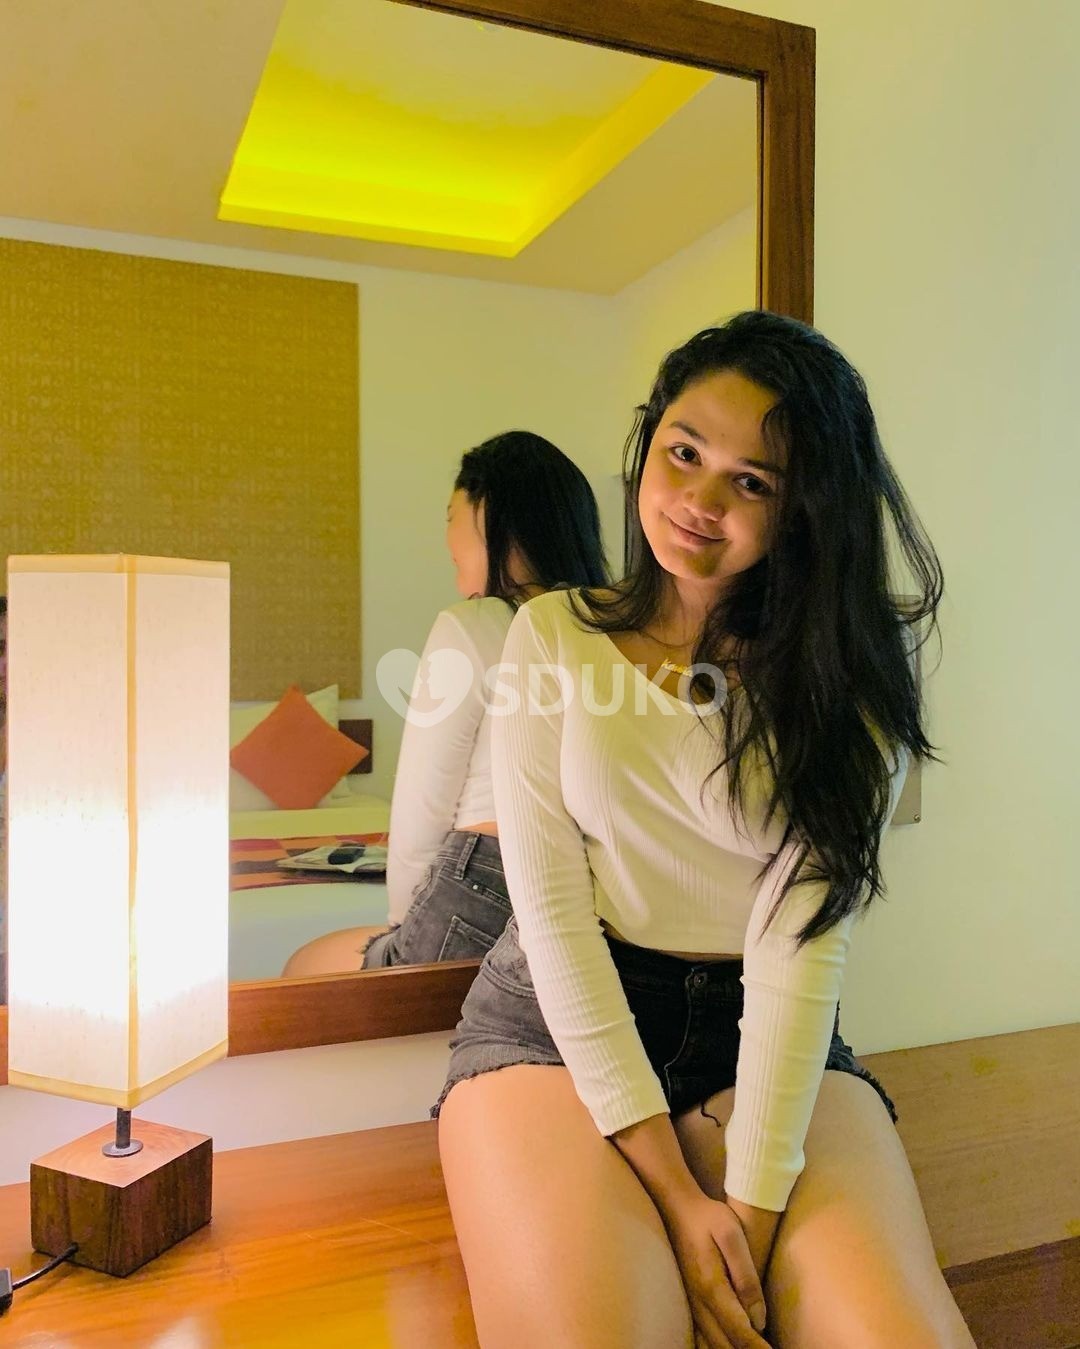 Jodhpur 👉 Low price 100% genuinely 🔝 sexy vip 👥call girl service available 💯% safe and secure. 24x7 hour's